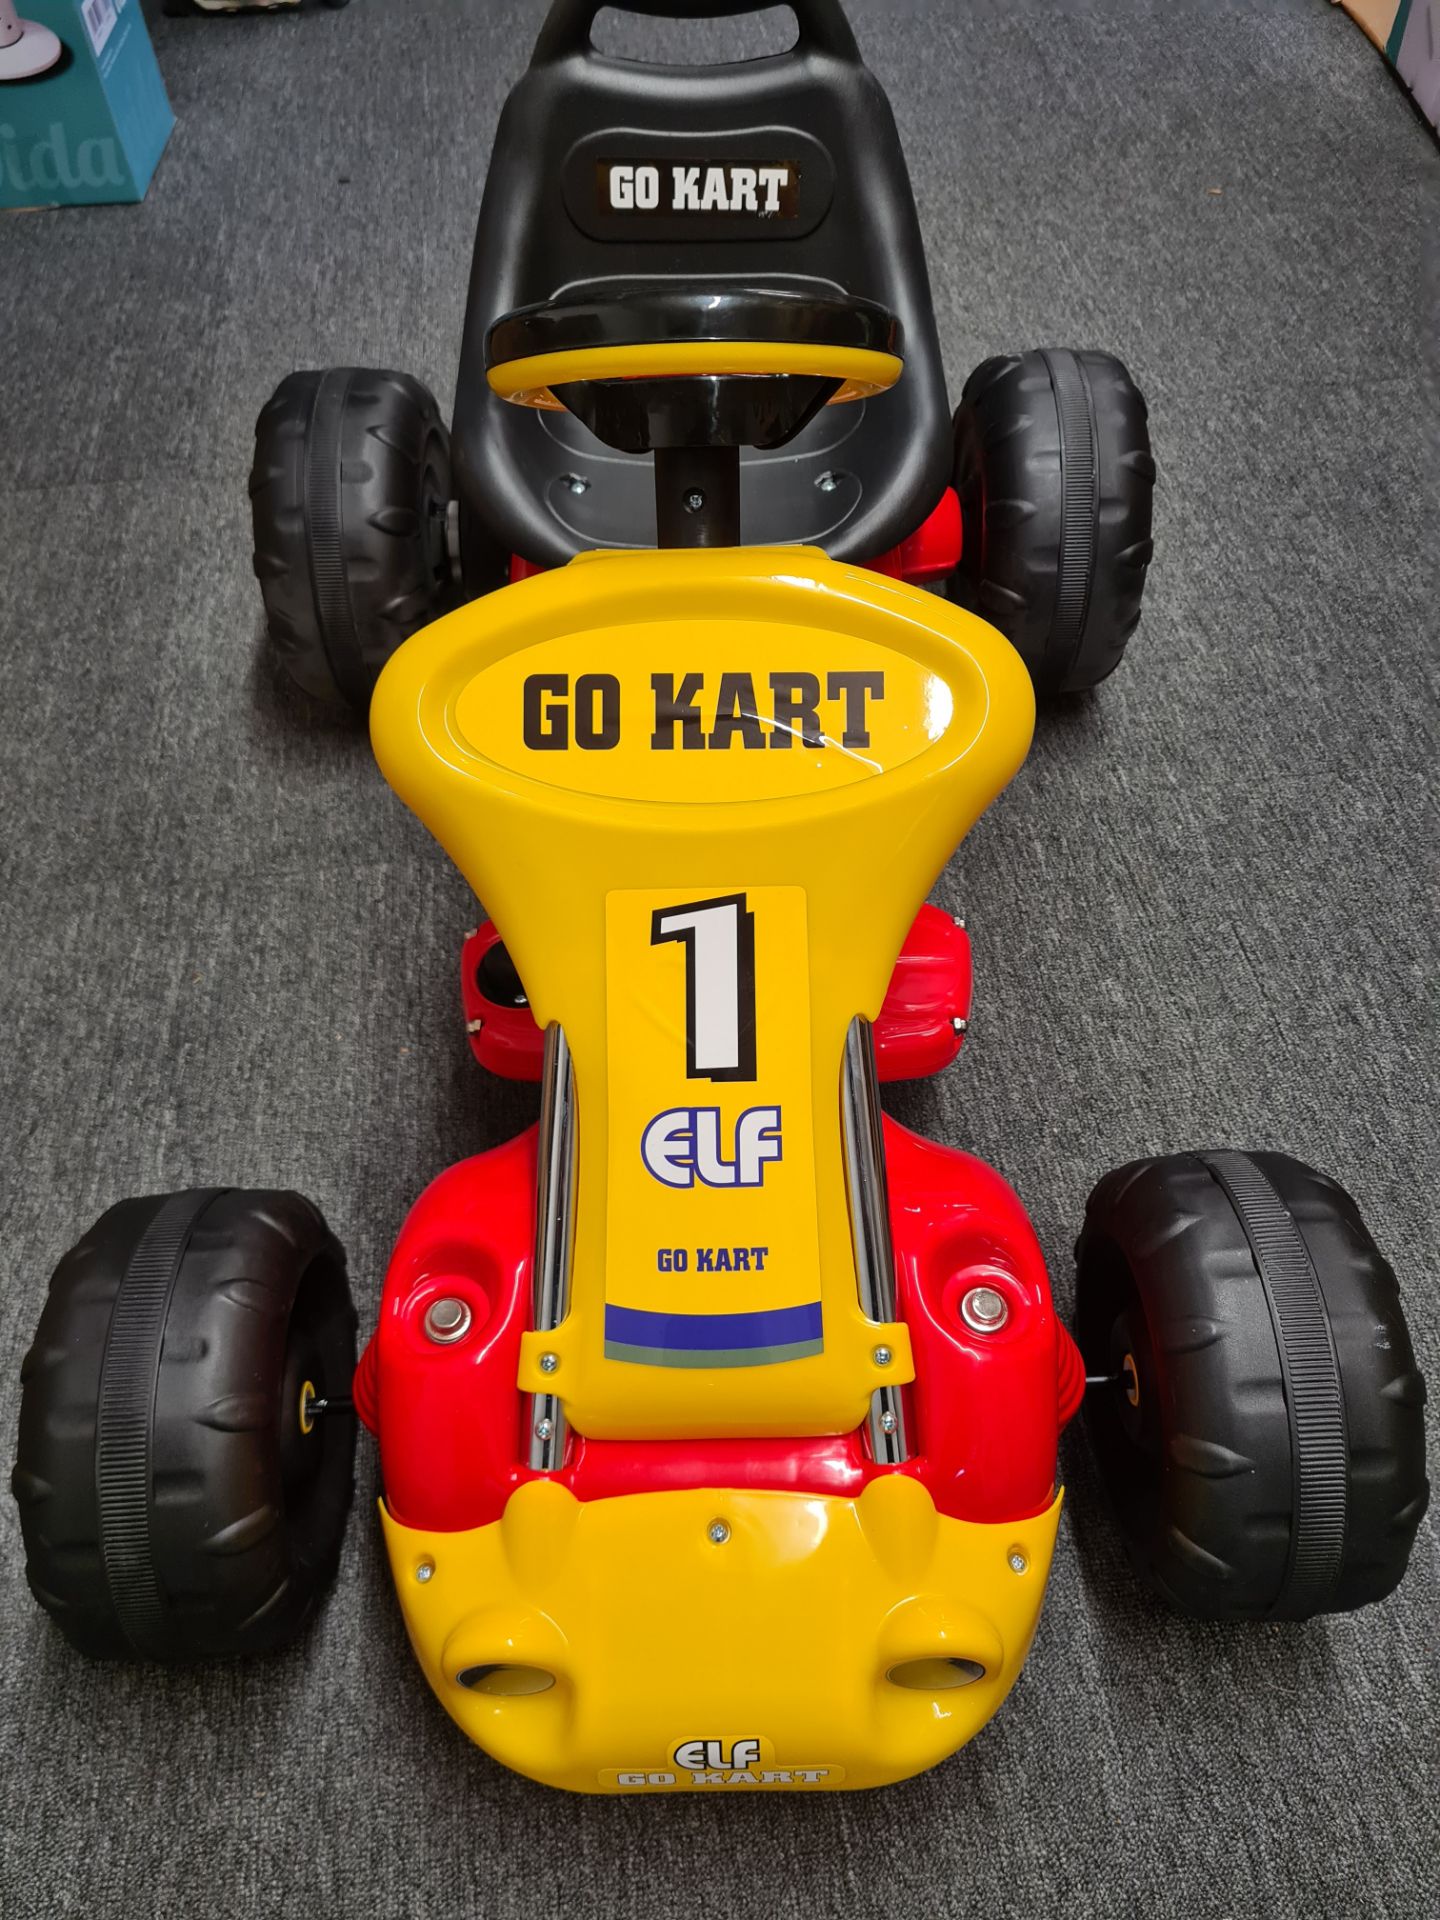 10 X ELECTRIC 6V RIDE ON GO KART - RED / YELLOW £1500 - BRAND NEW FOR KIDS - Image 2 of 10